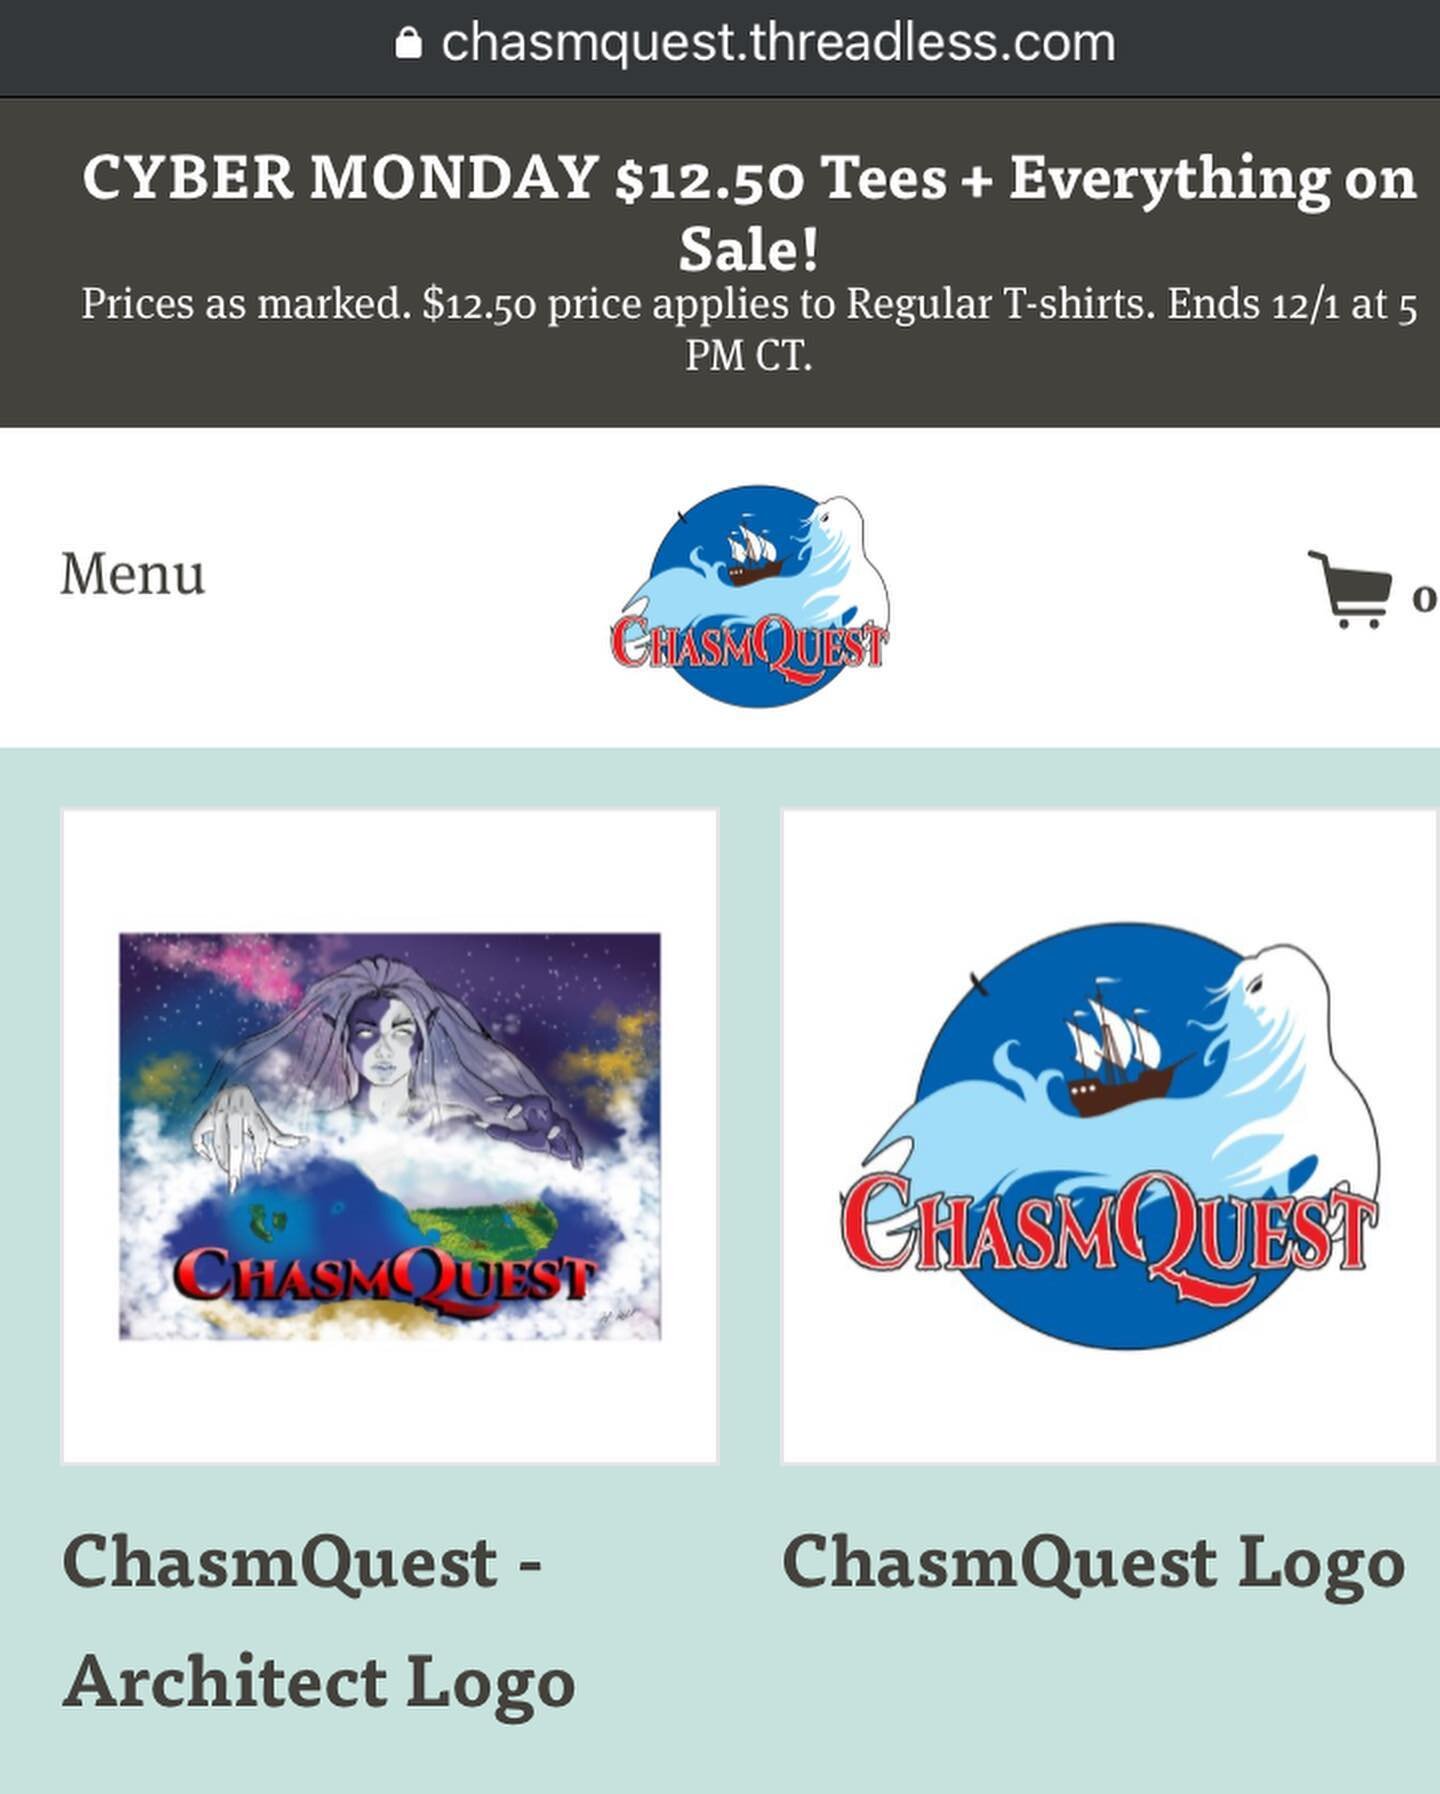 AMAZING SALE! Happening on @threadless get CQ merch for $15 and under!!! Ends 12/1 at 5p ct 

Link in bio! Or go to ChasmQuest.Threadless.com

Art and design by the talented Taylor Haydel @diagnostick (rowdy boys by Randall Hampton @randallhampton )
